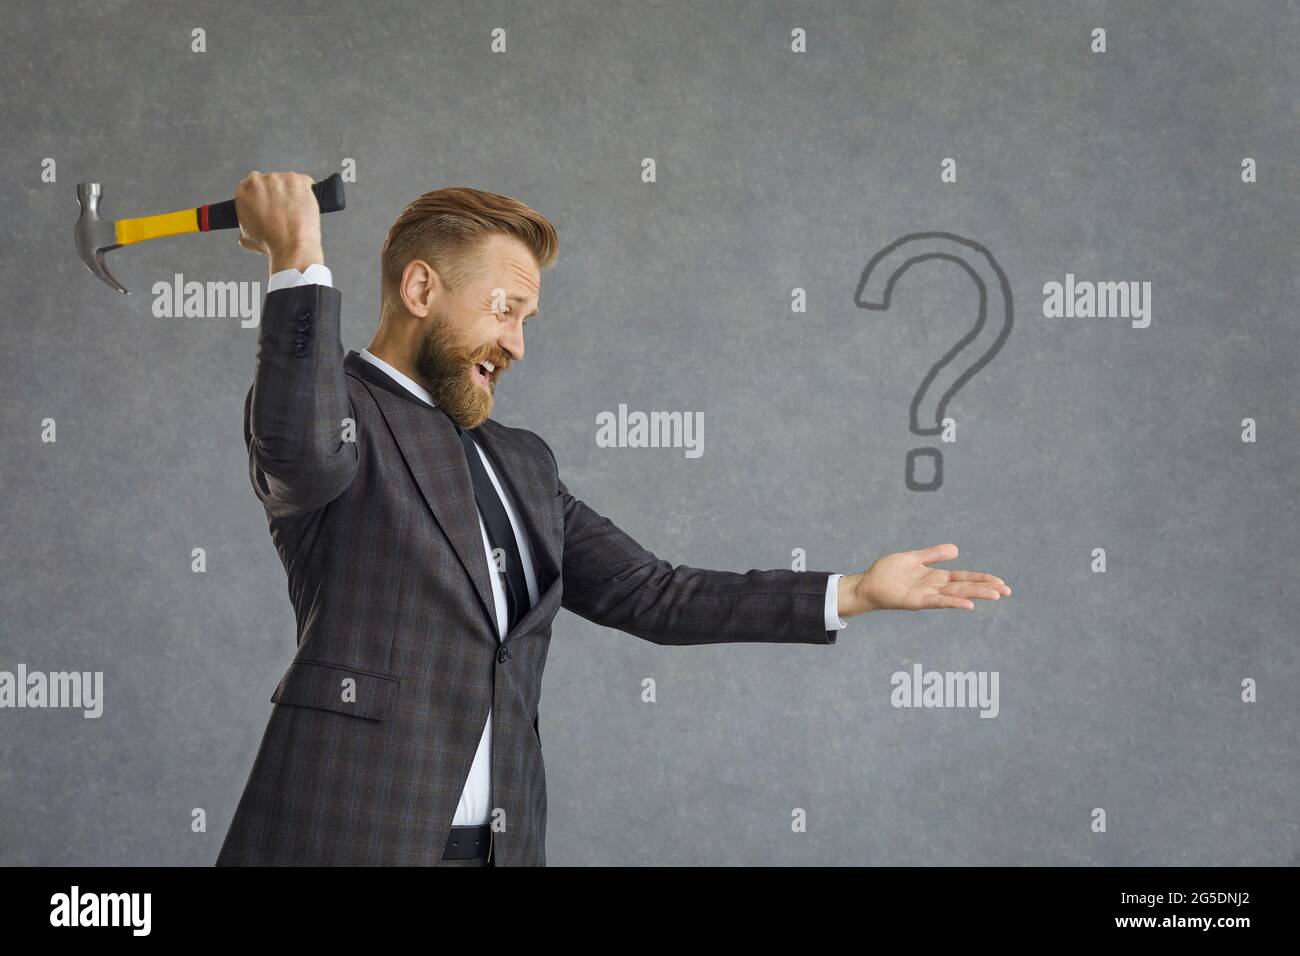 Businessman looking for answers to questions wants to crash question mark with hammer Stock Photo